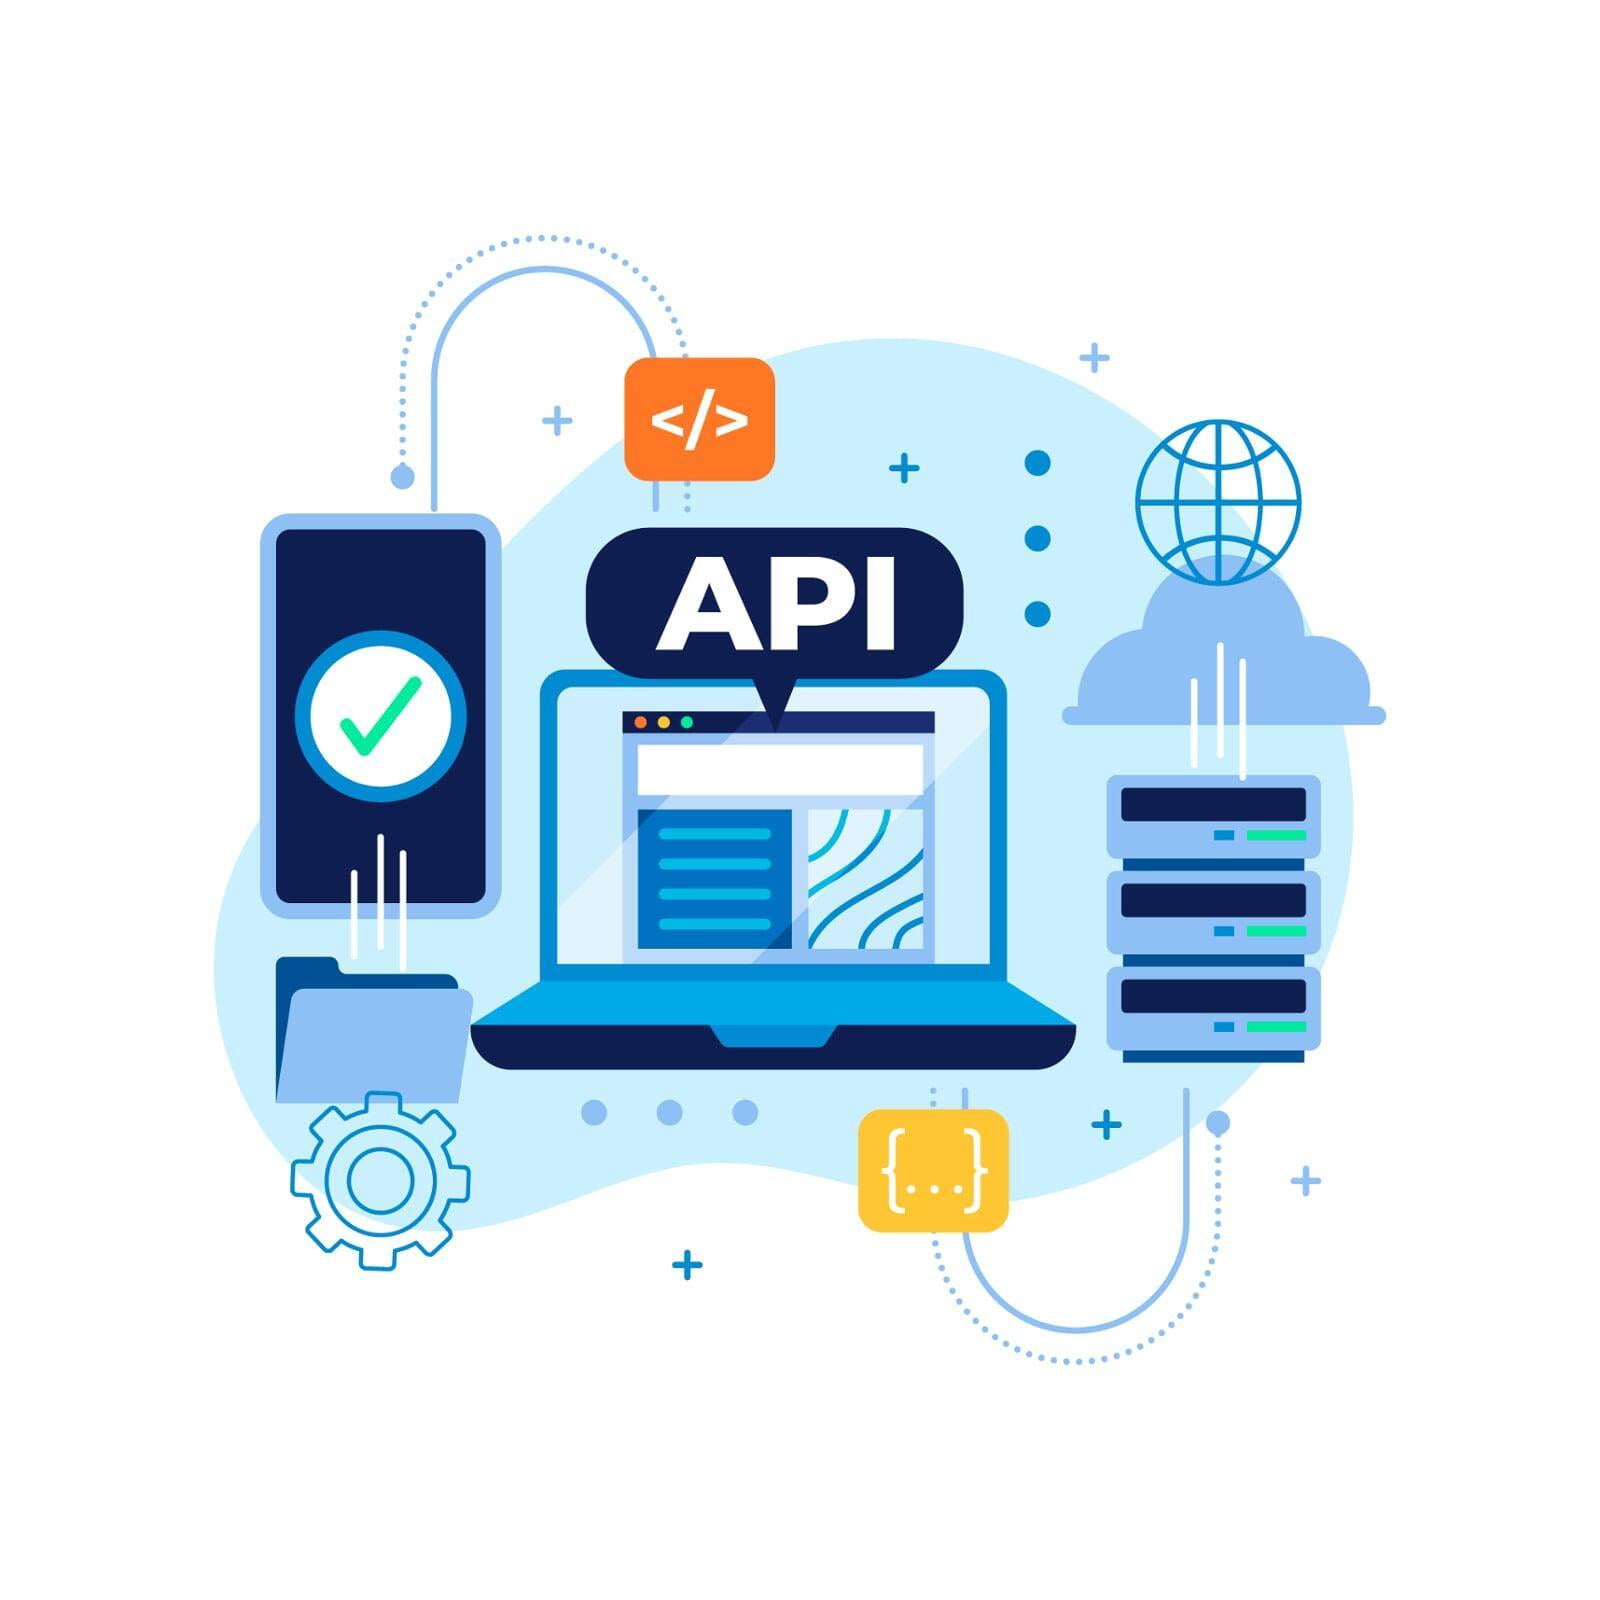 Web Services and APIs